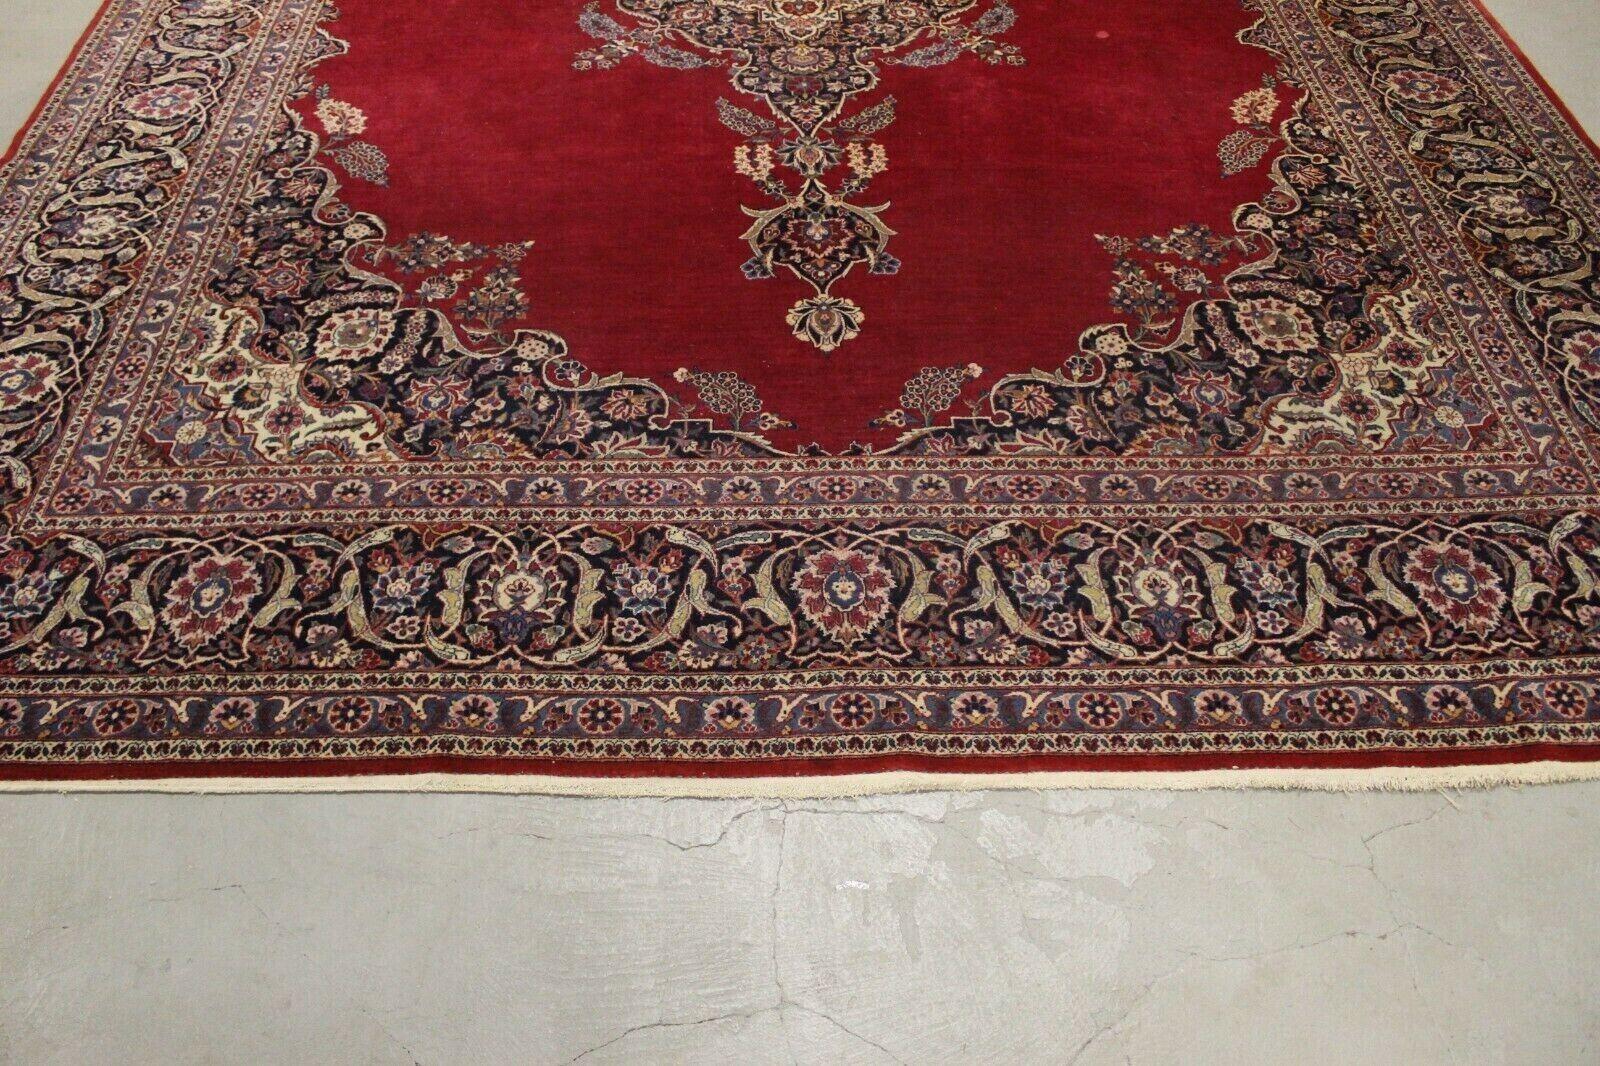 Handmade Vintage Persian Style Kashan Red Rug 10' x 13.6', 1950s - 1K39 For Sale 5